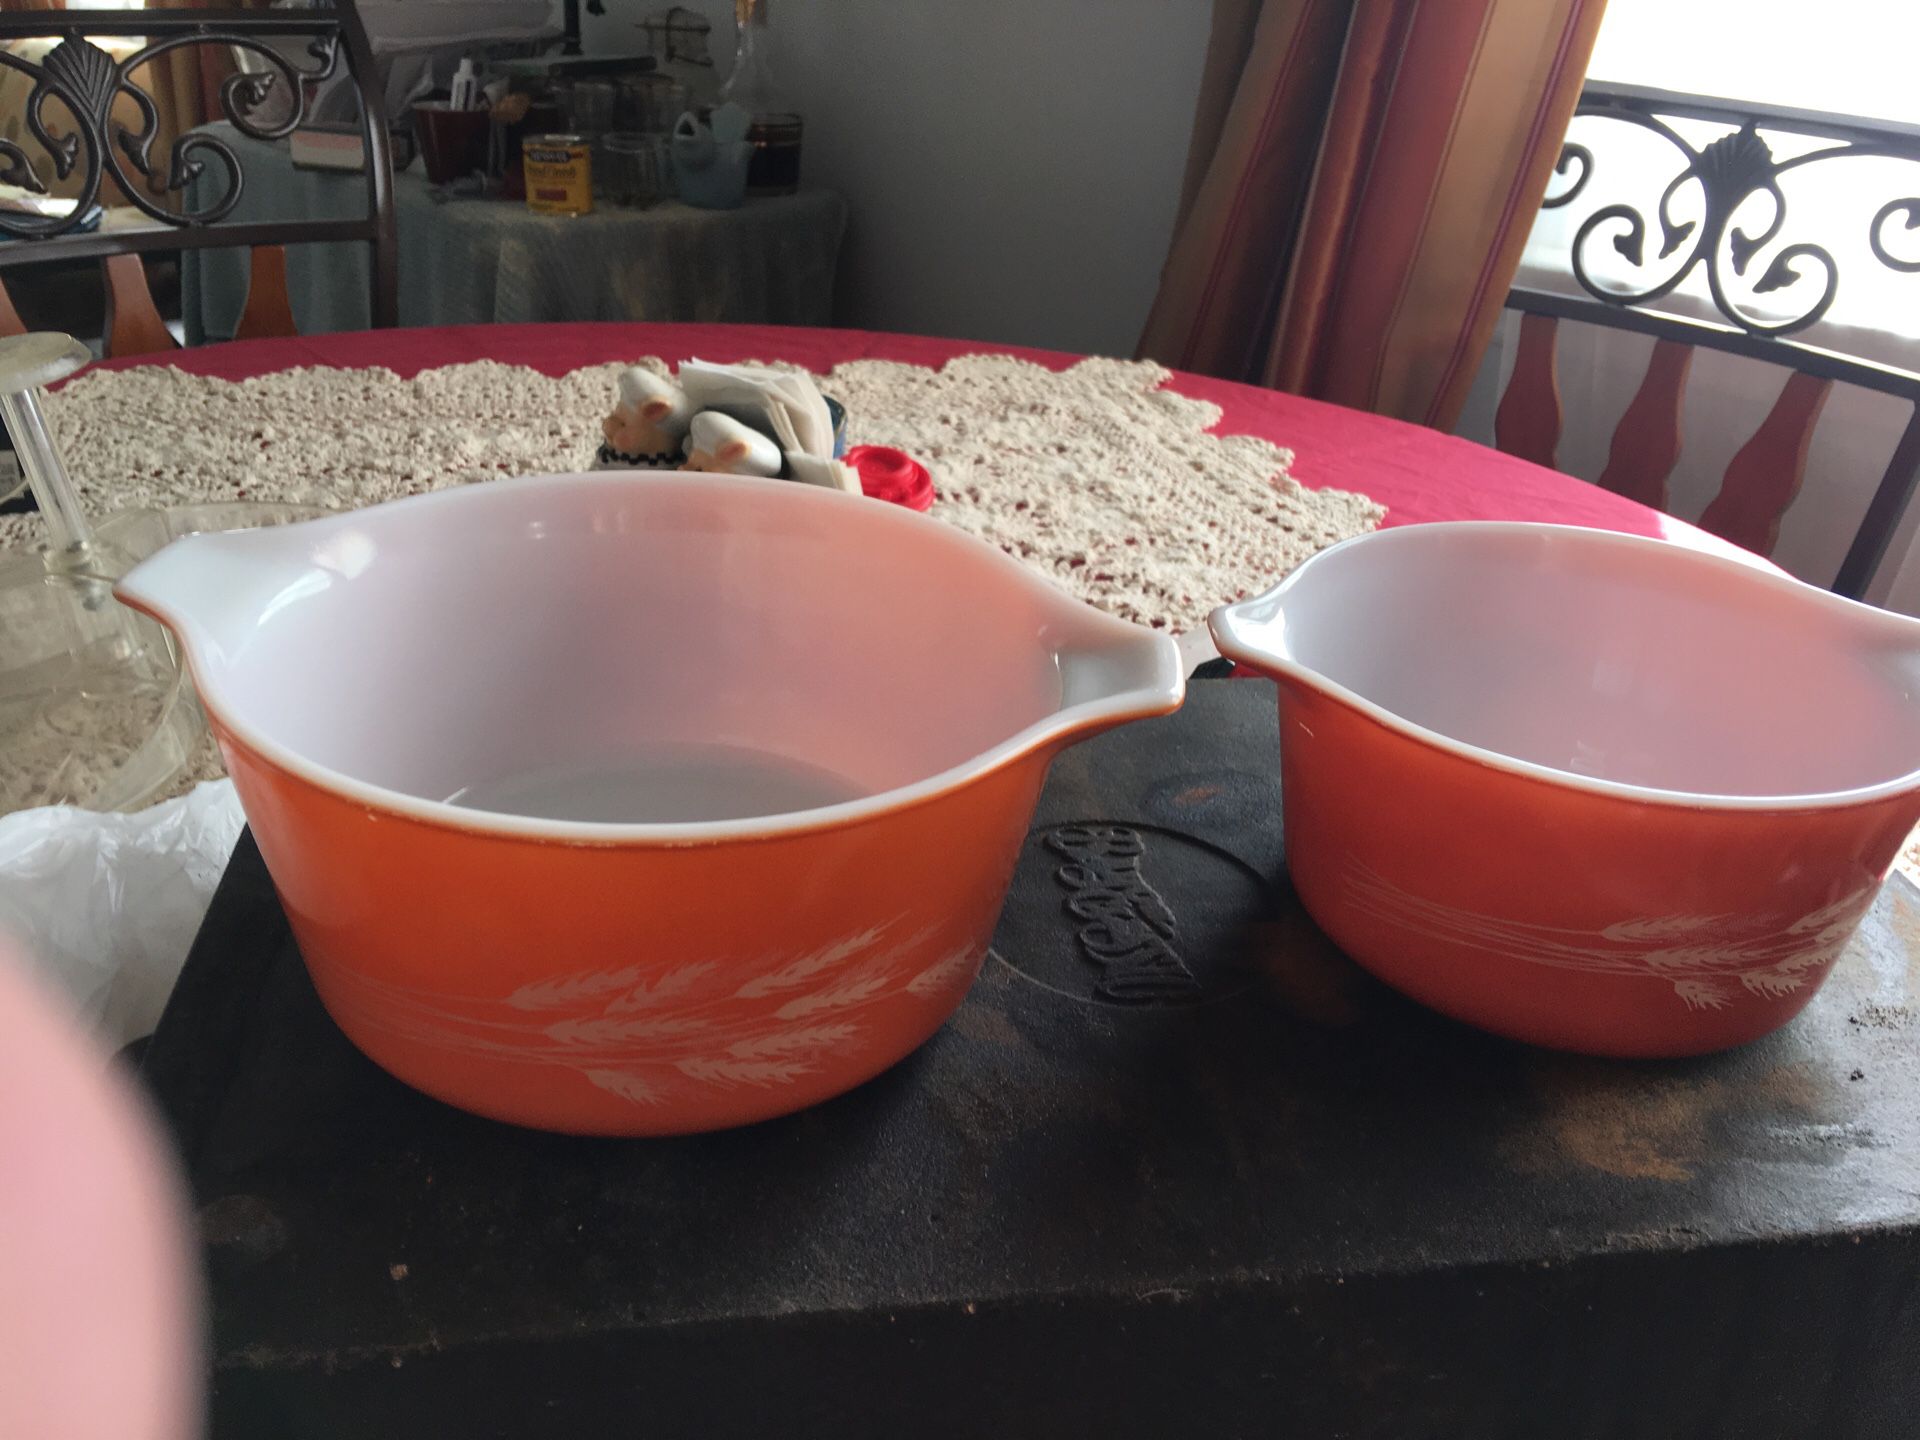 Wheat Pyrex dishes